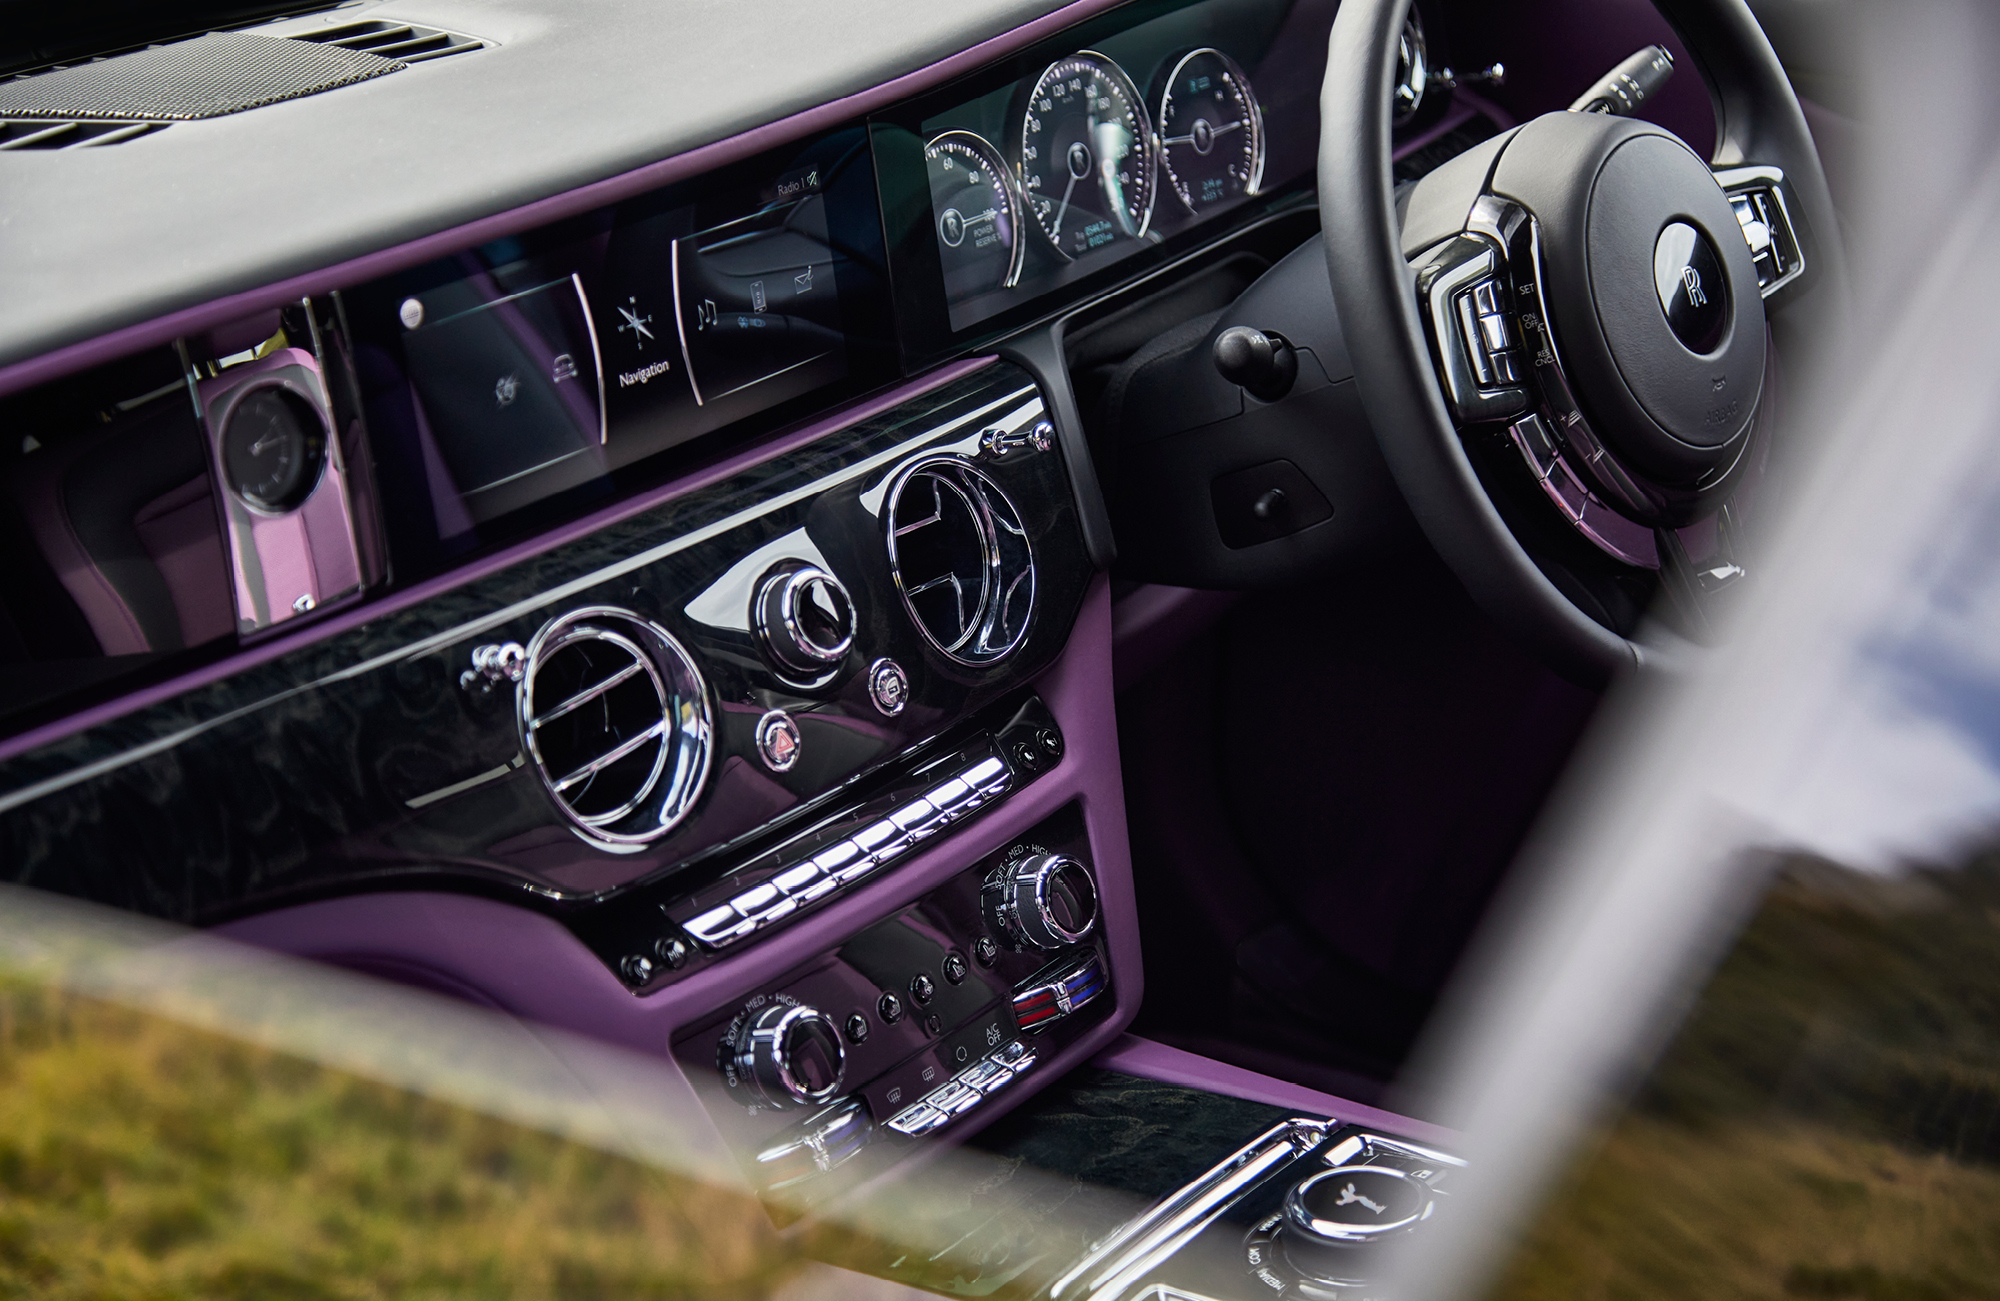 The interior of the new Rolls-Royce Ghost